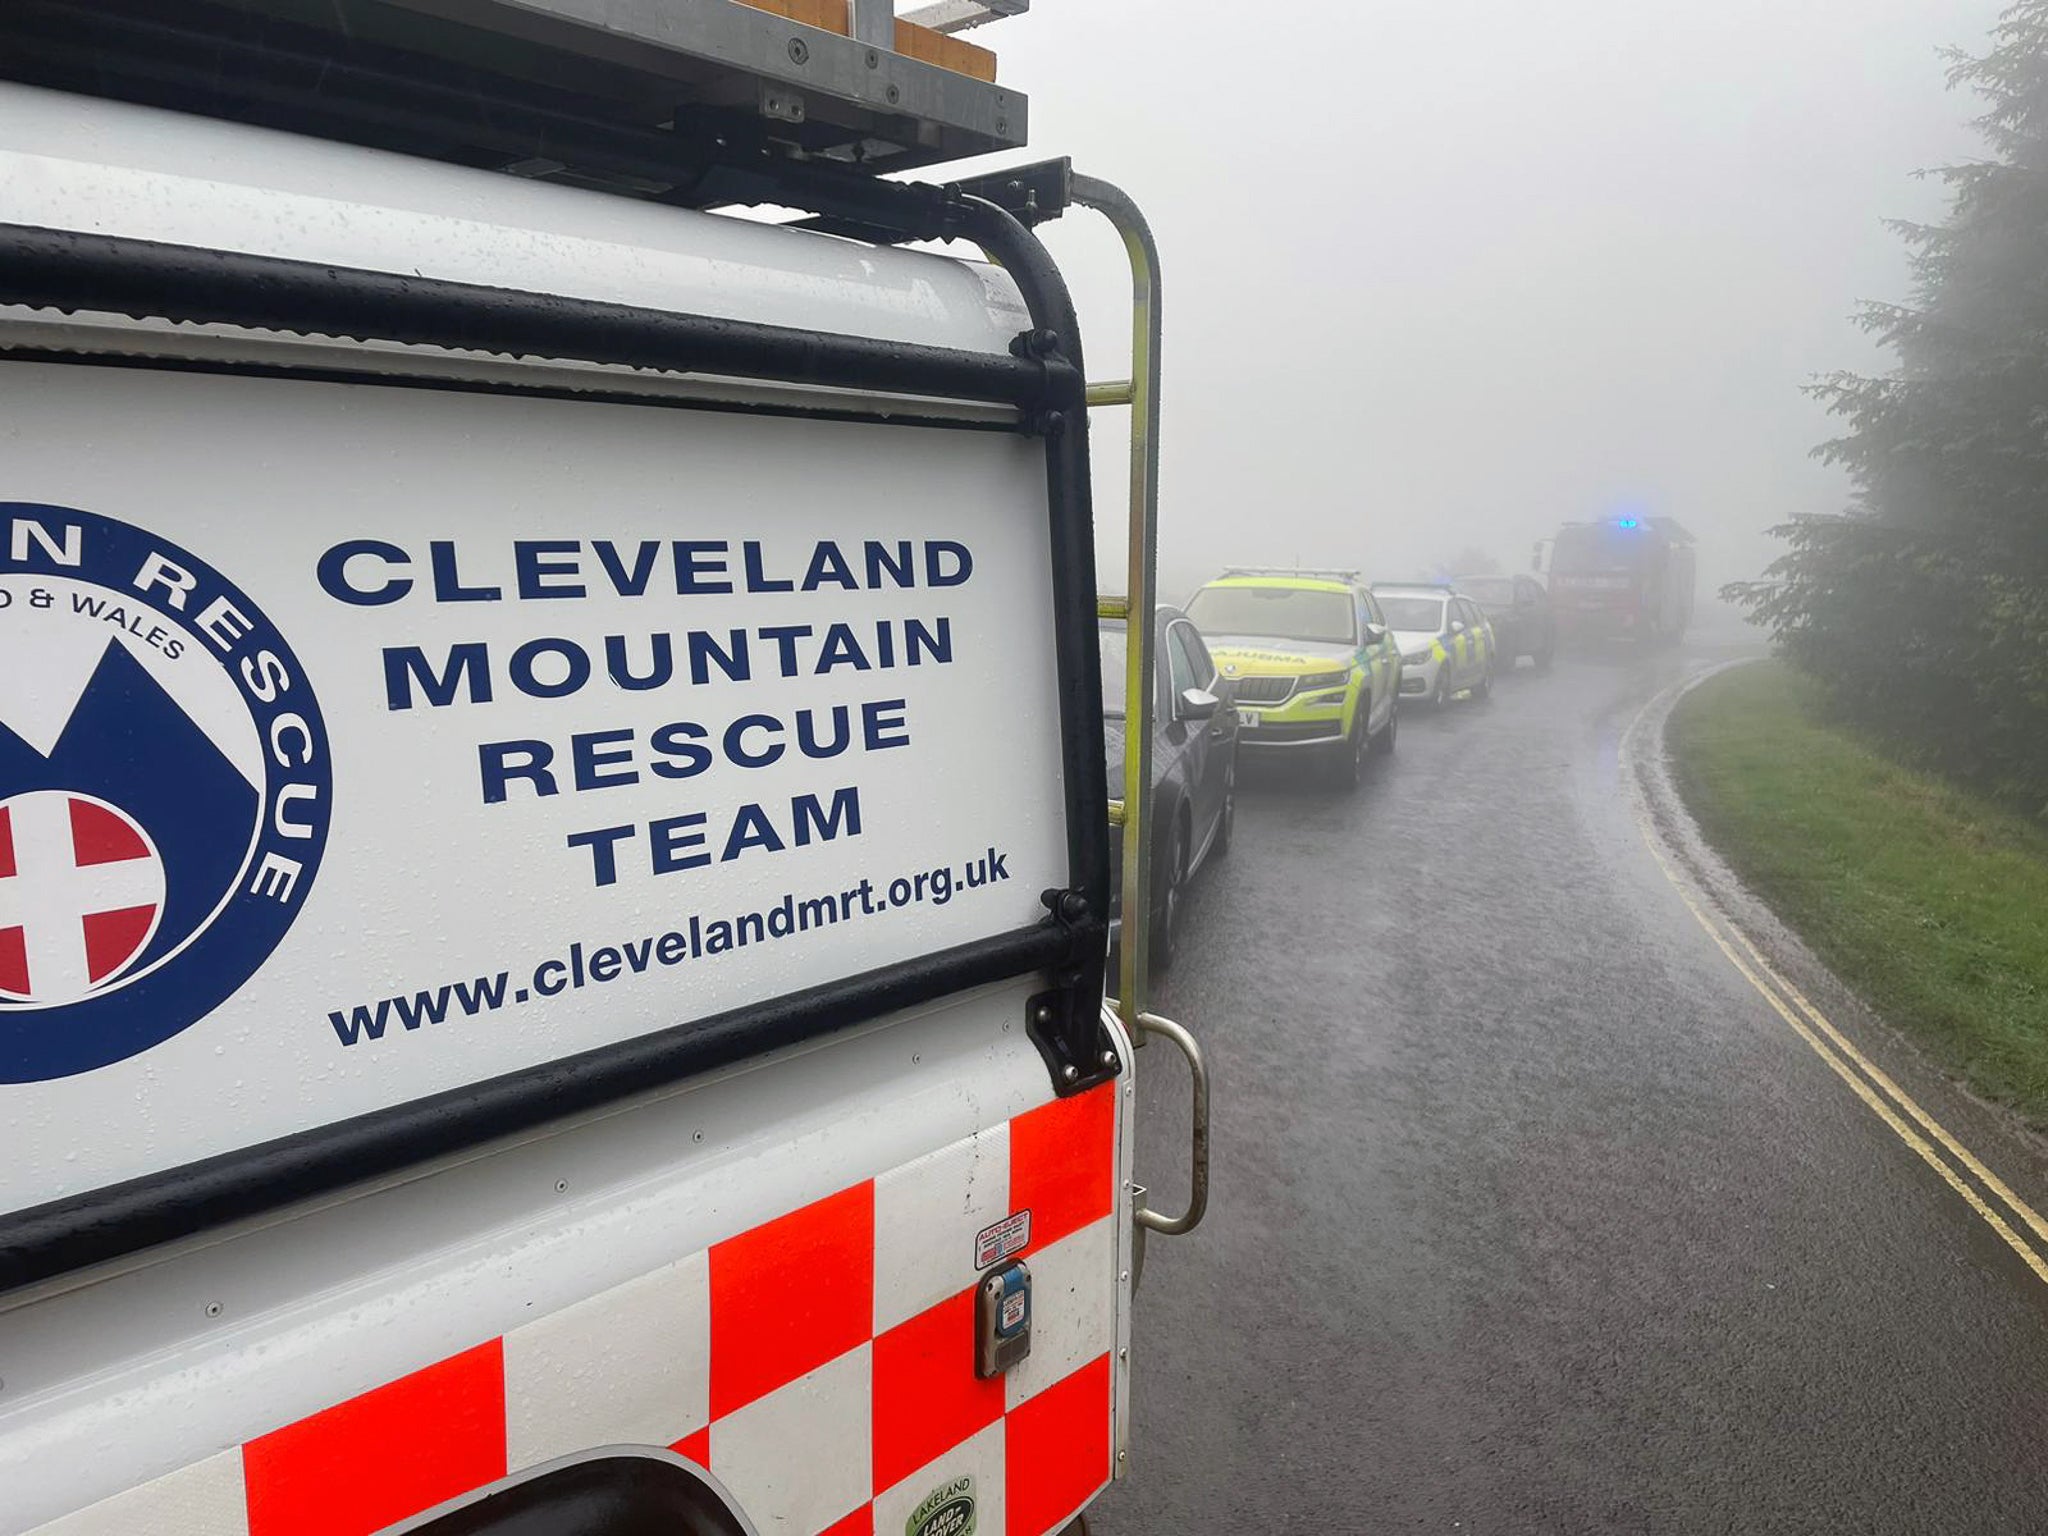 Cleveland Mountain Rescue Team (MRT) volunteers were called in the early afternoon to reports of a mudslide